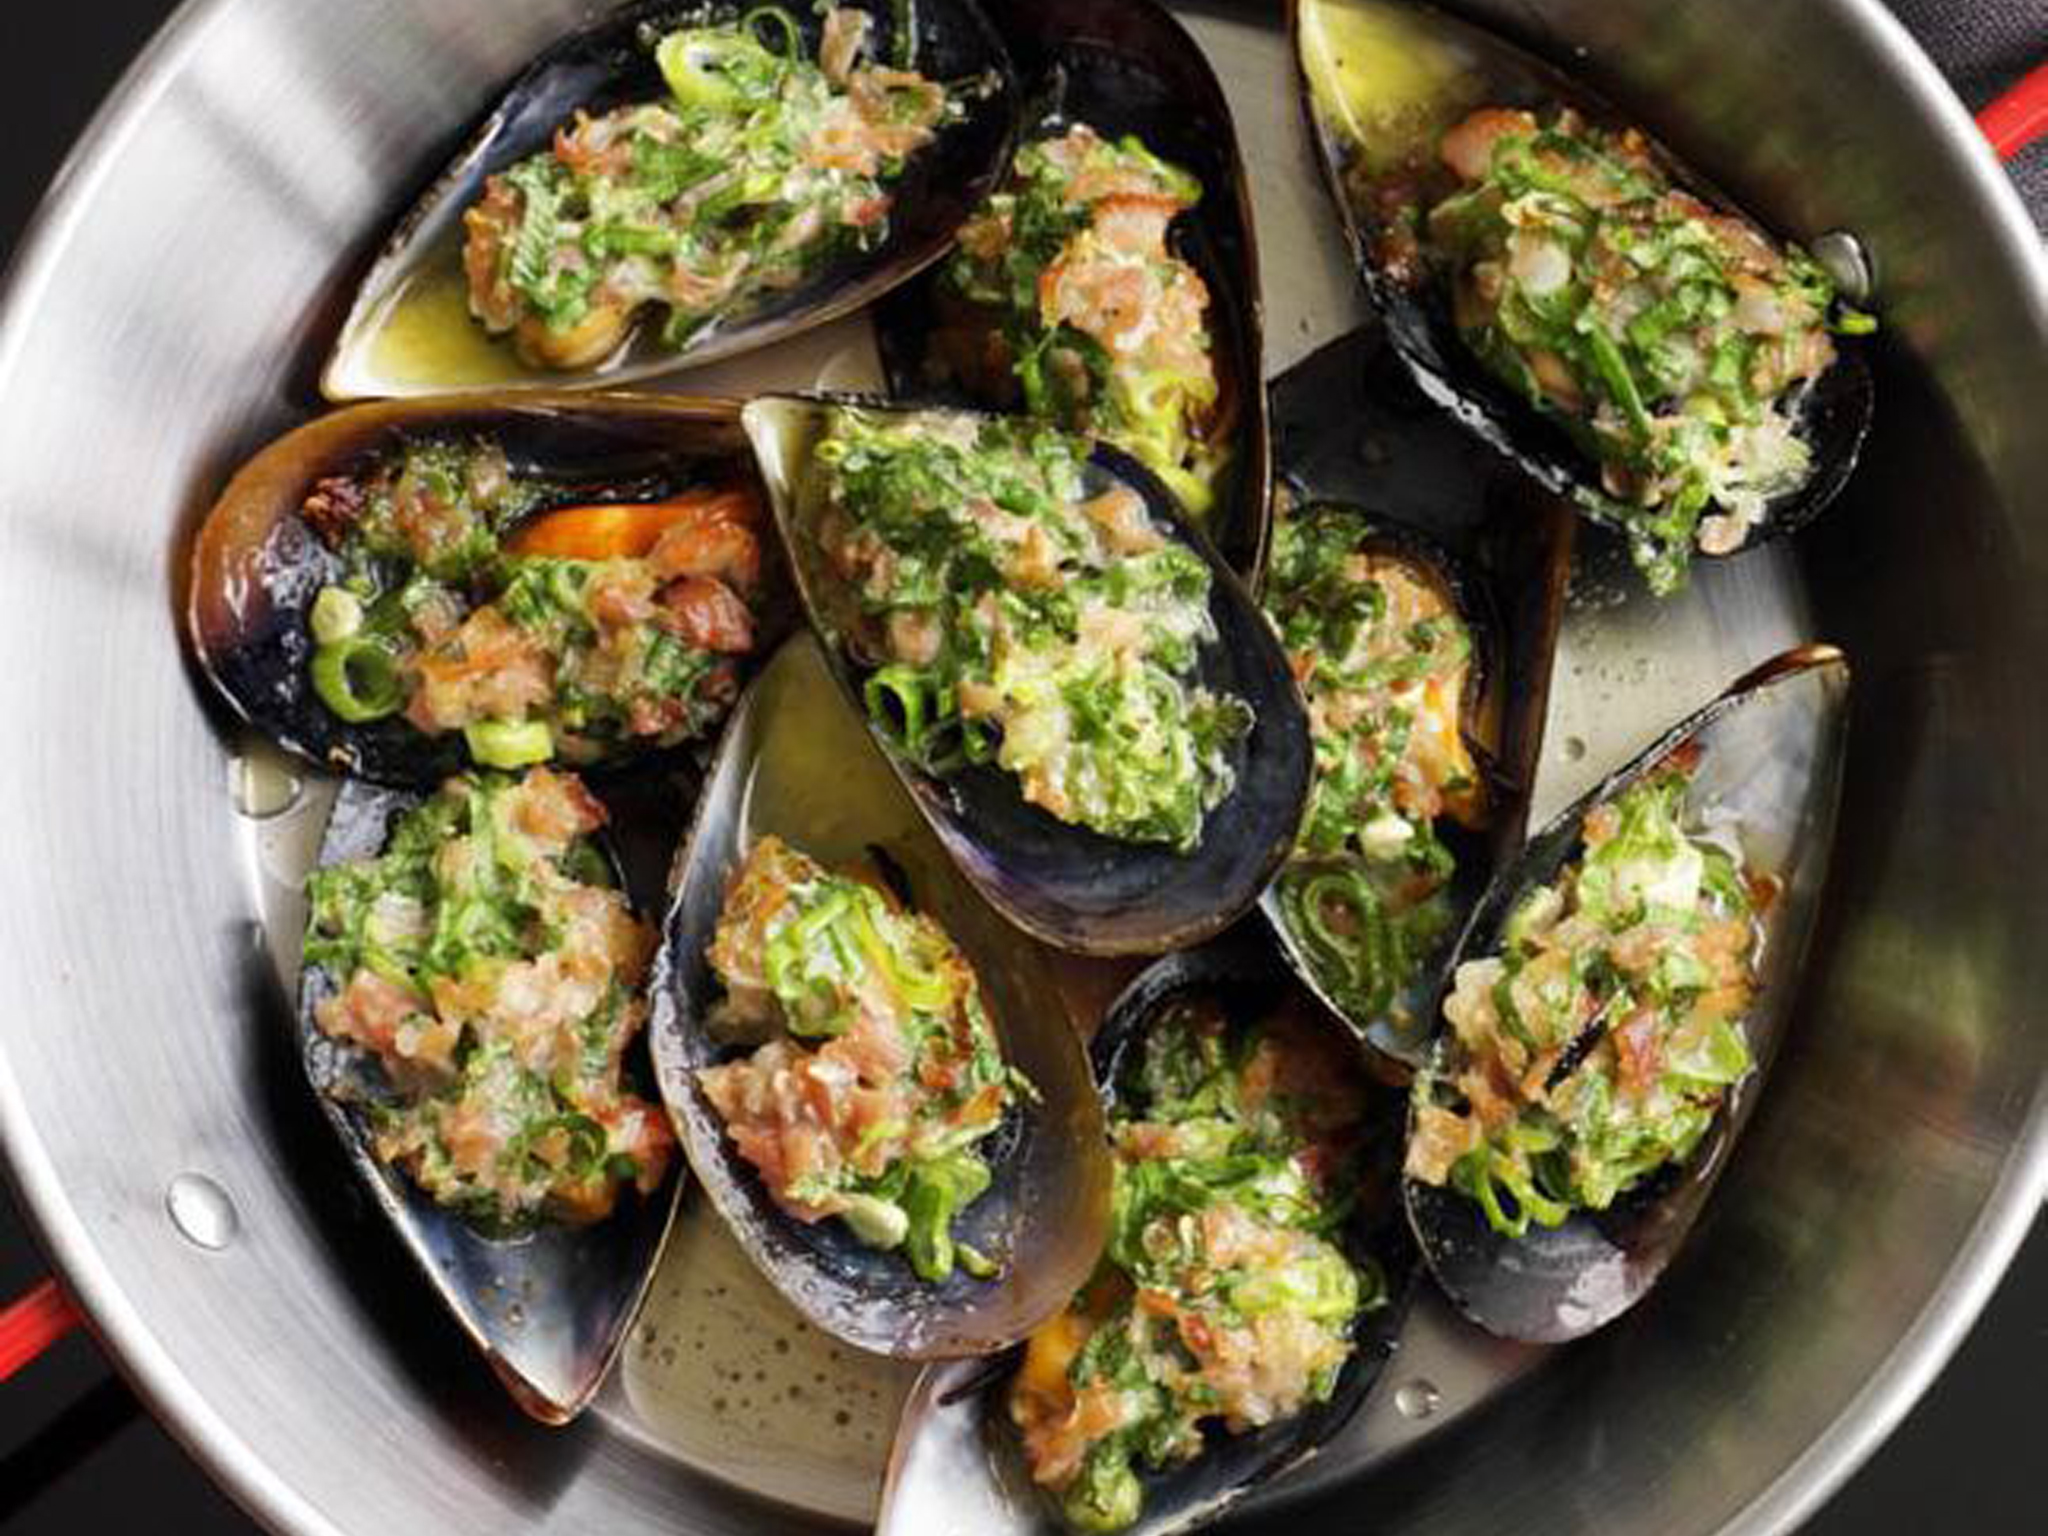 GRILLED MUSSELS WITH PROSCIUTTO